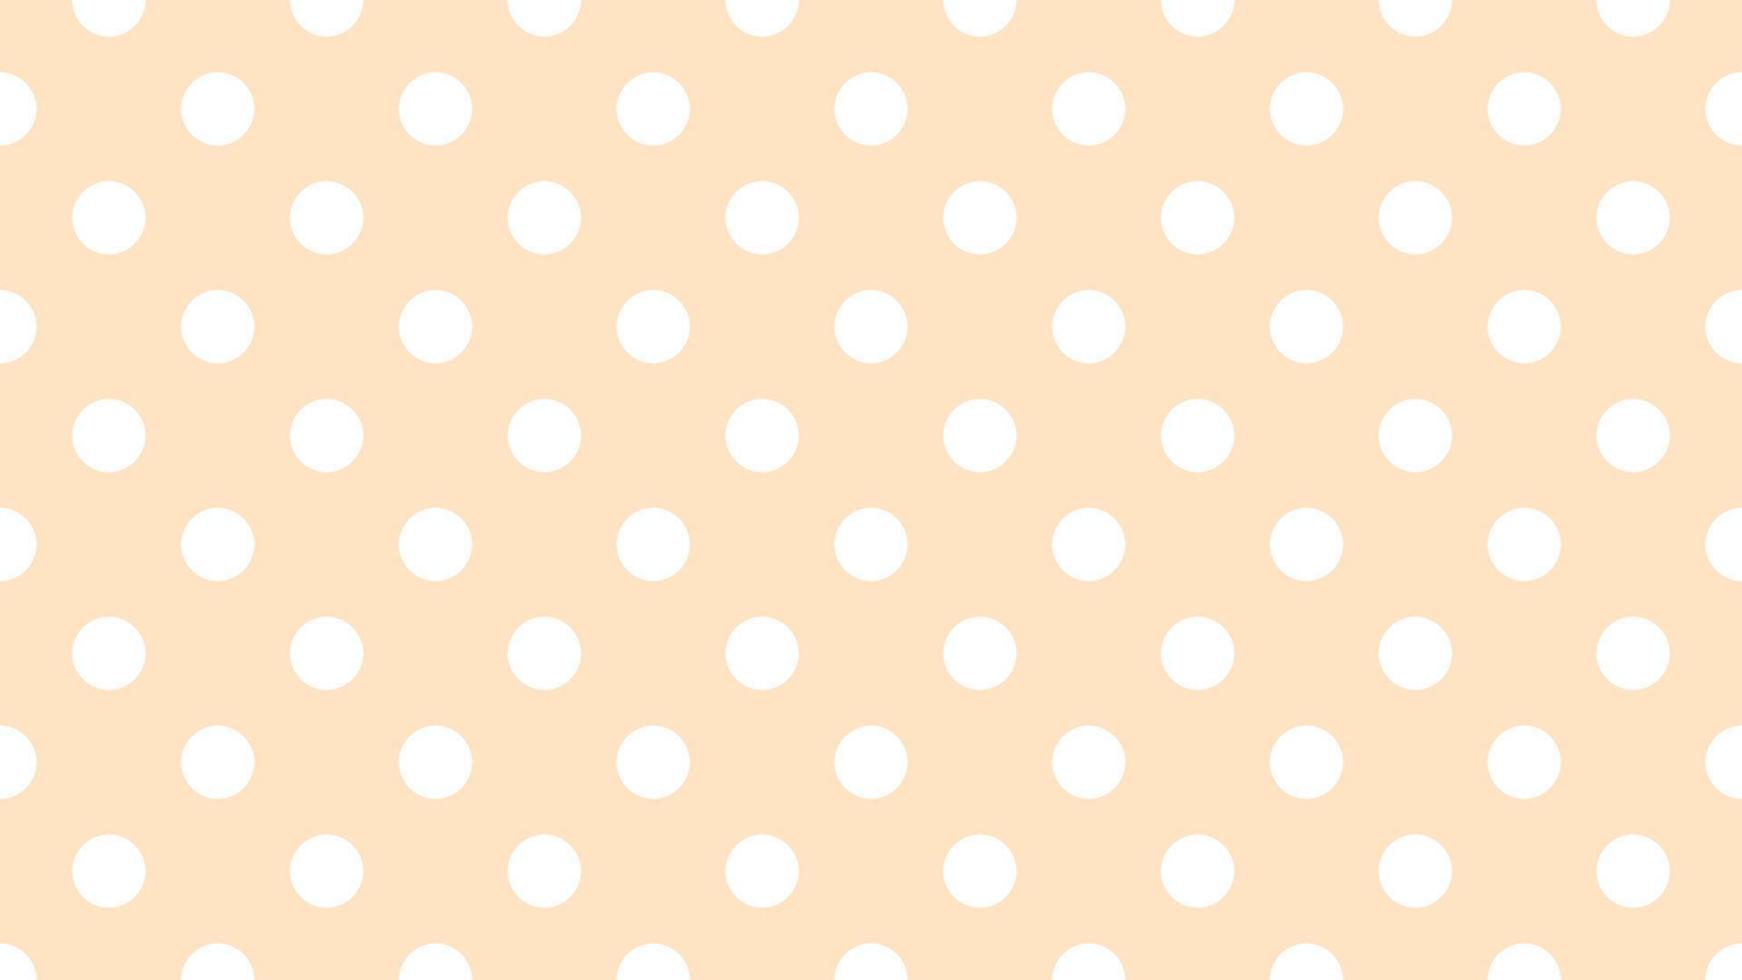 white color polka dots over bisque brown background vector